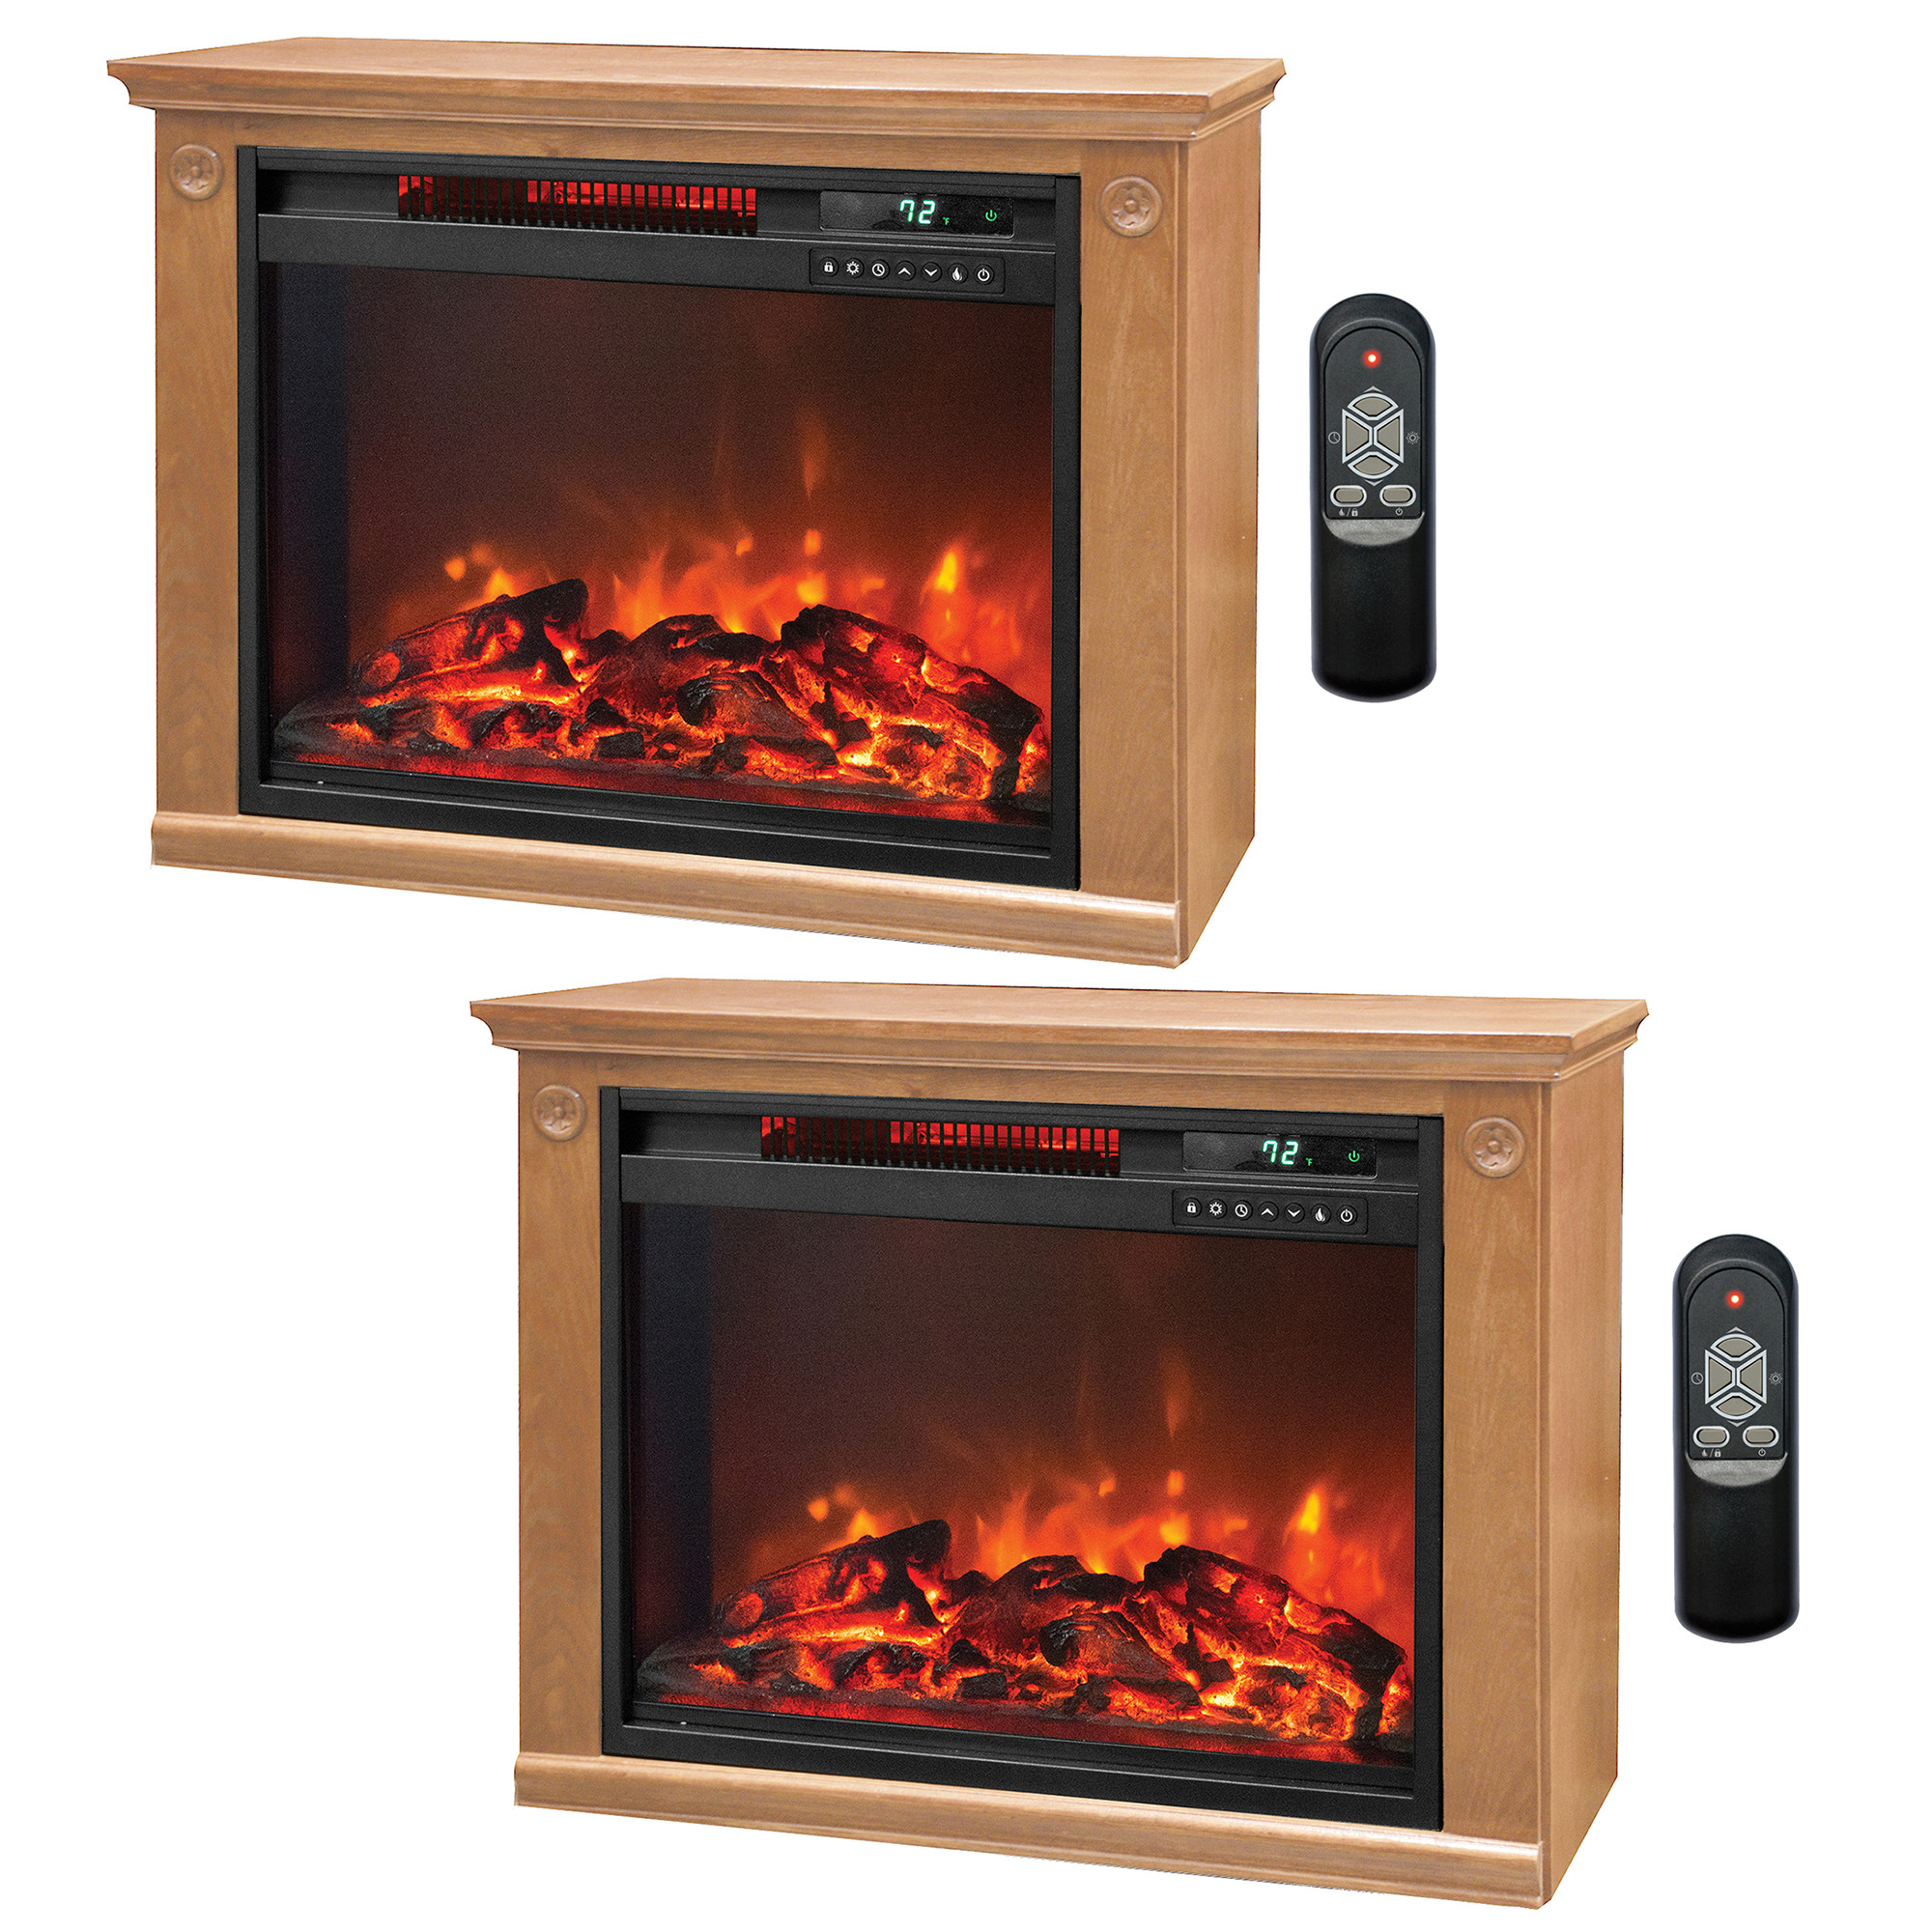 Electric Infrared Fireplace Heaters
 Lifesmart 3 Element Quartz Infrared Electric Portable